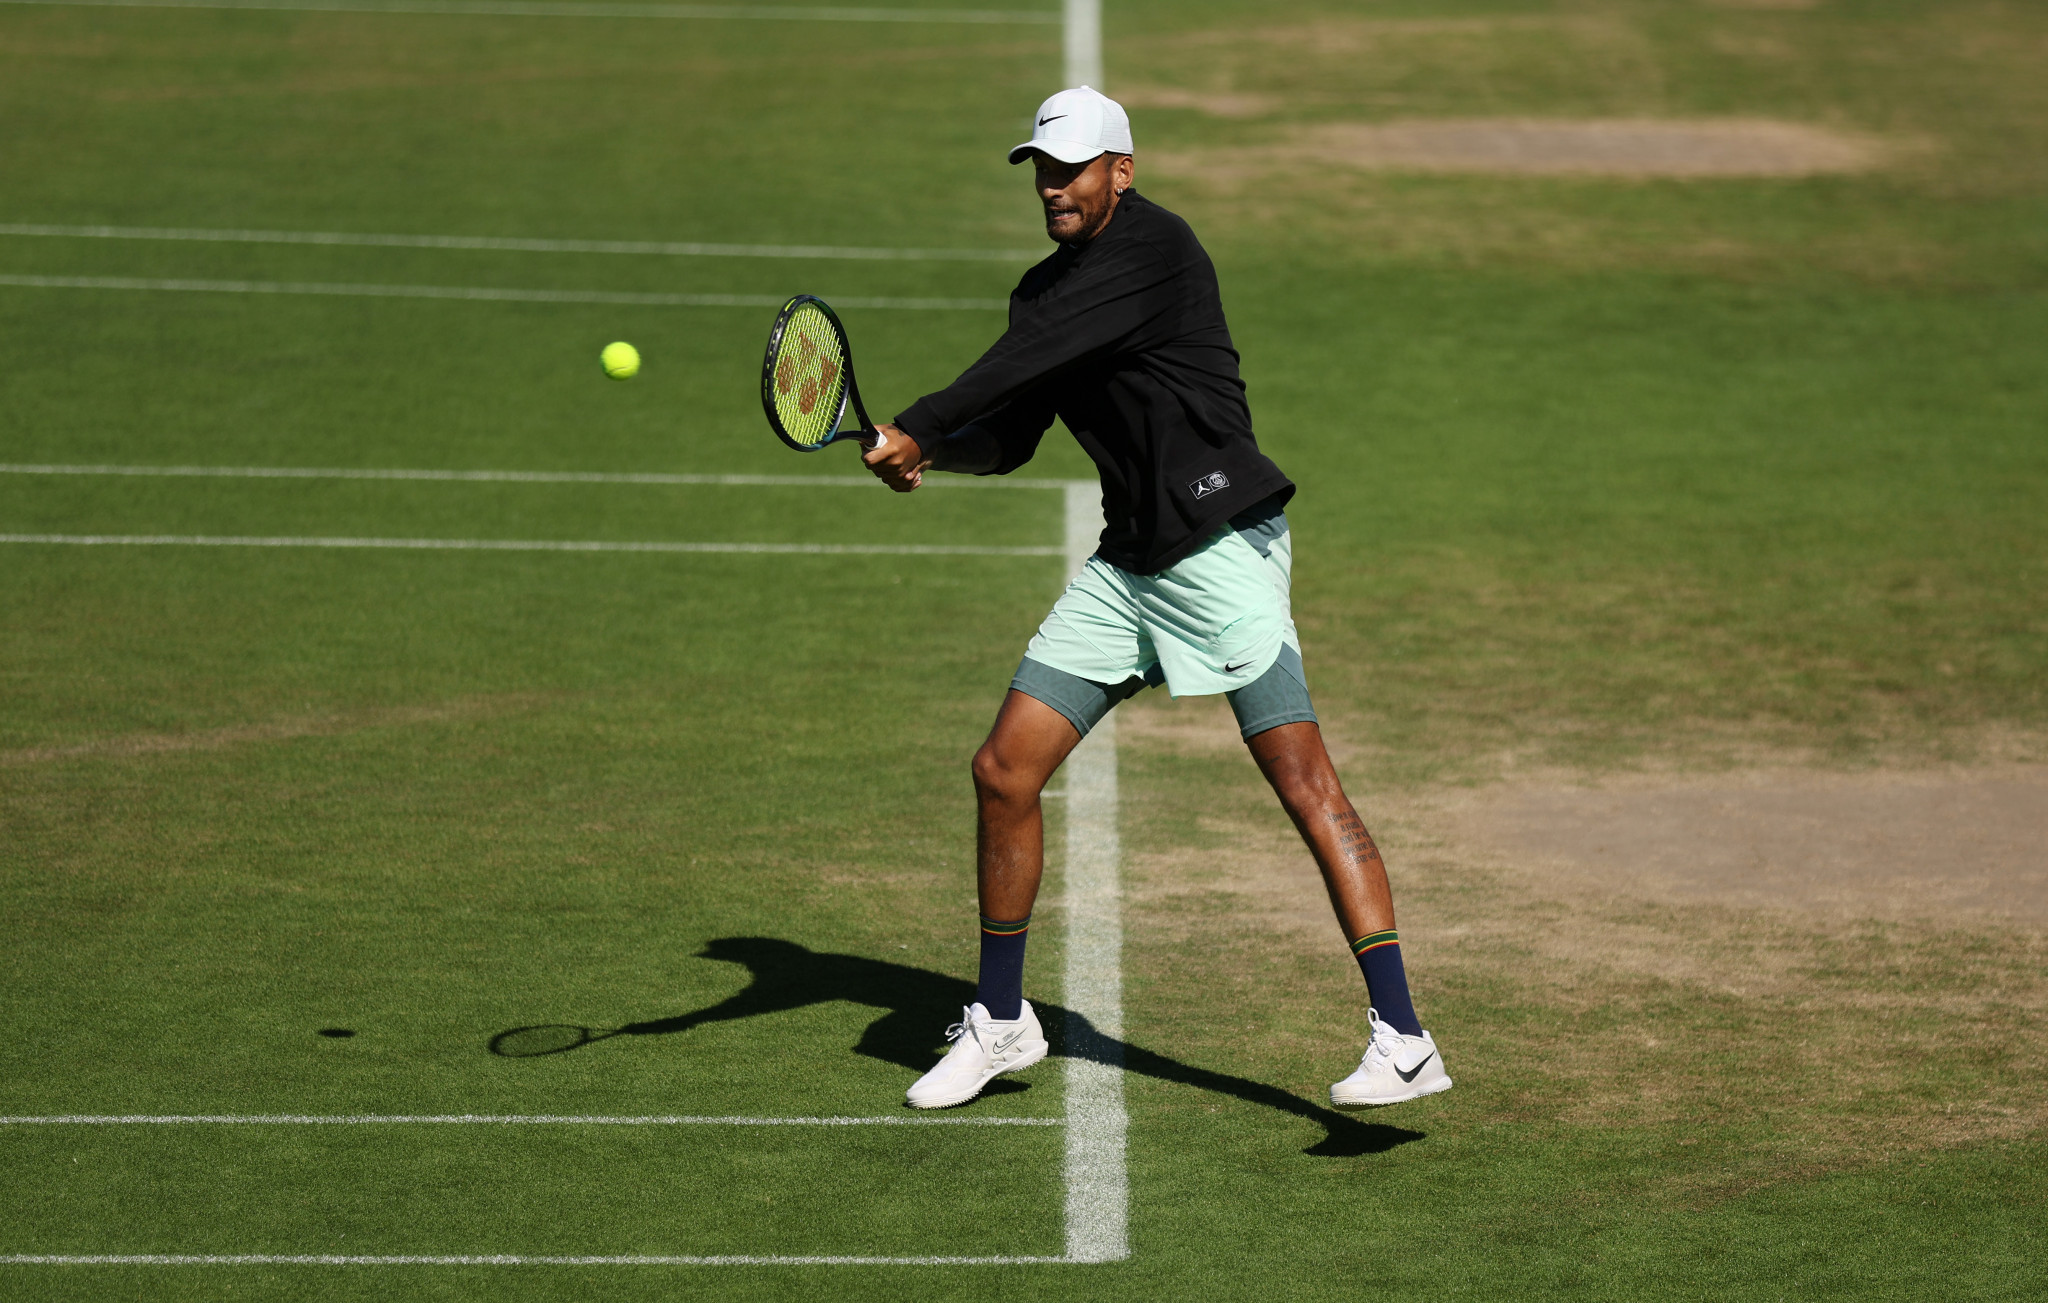 Nick Kyrgios capitalised on his on walkover versus Rafael Nadal by using the practise courts ©Getty Images